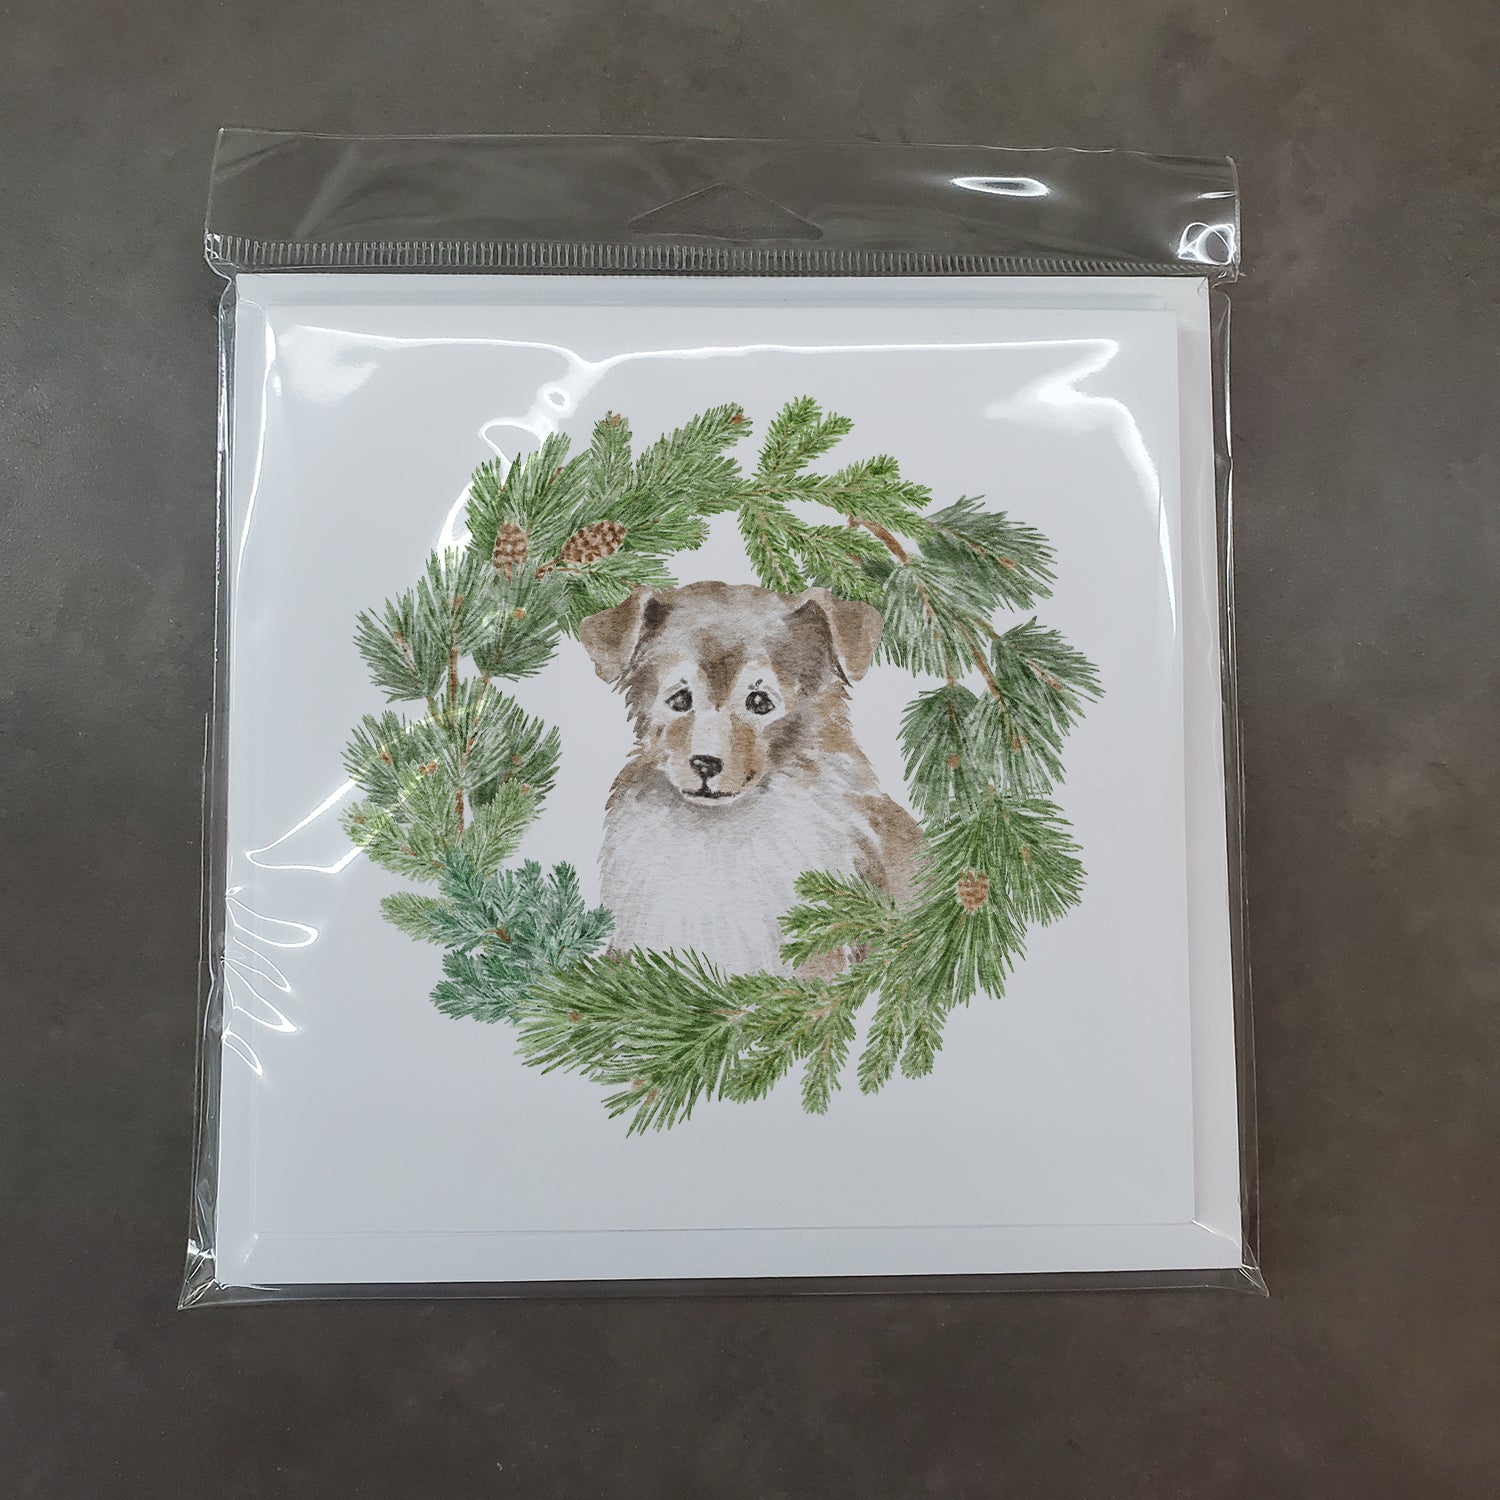 Sheltie/Shetland Sheepdog Puppy Sable Smile with Christmas Wreath Square Greeting Cards and Envelopes Pack of 8 - the-store.com